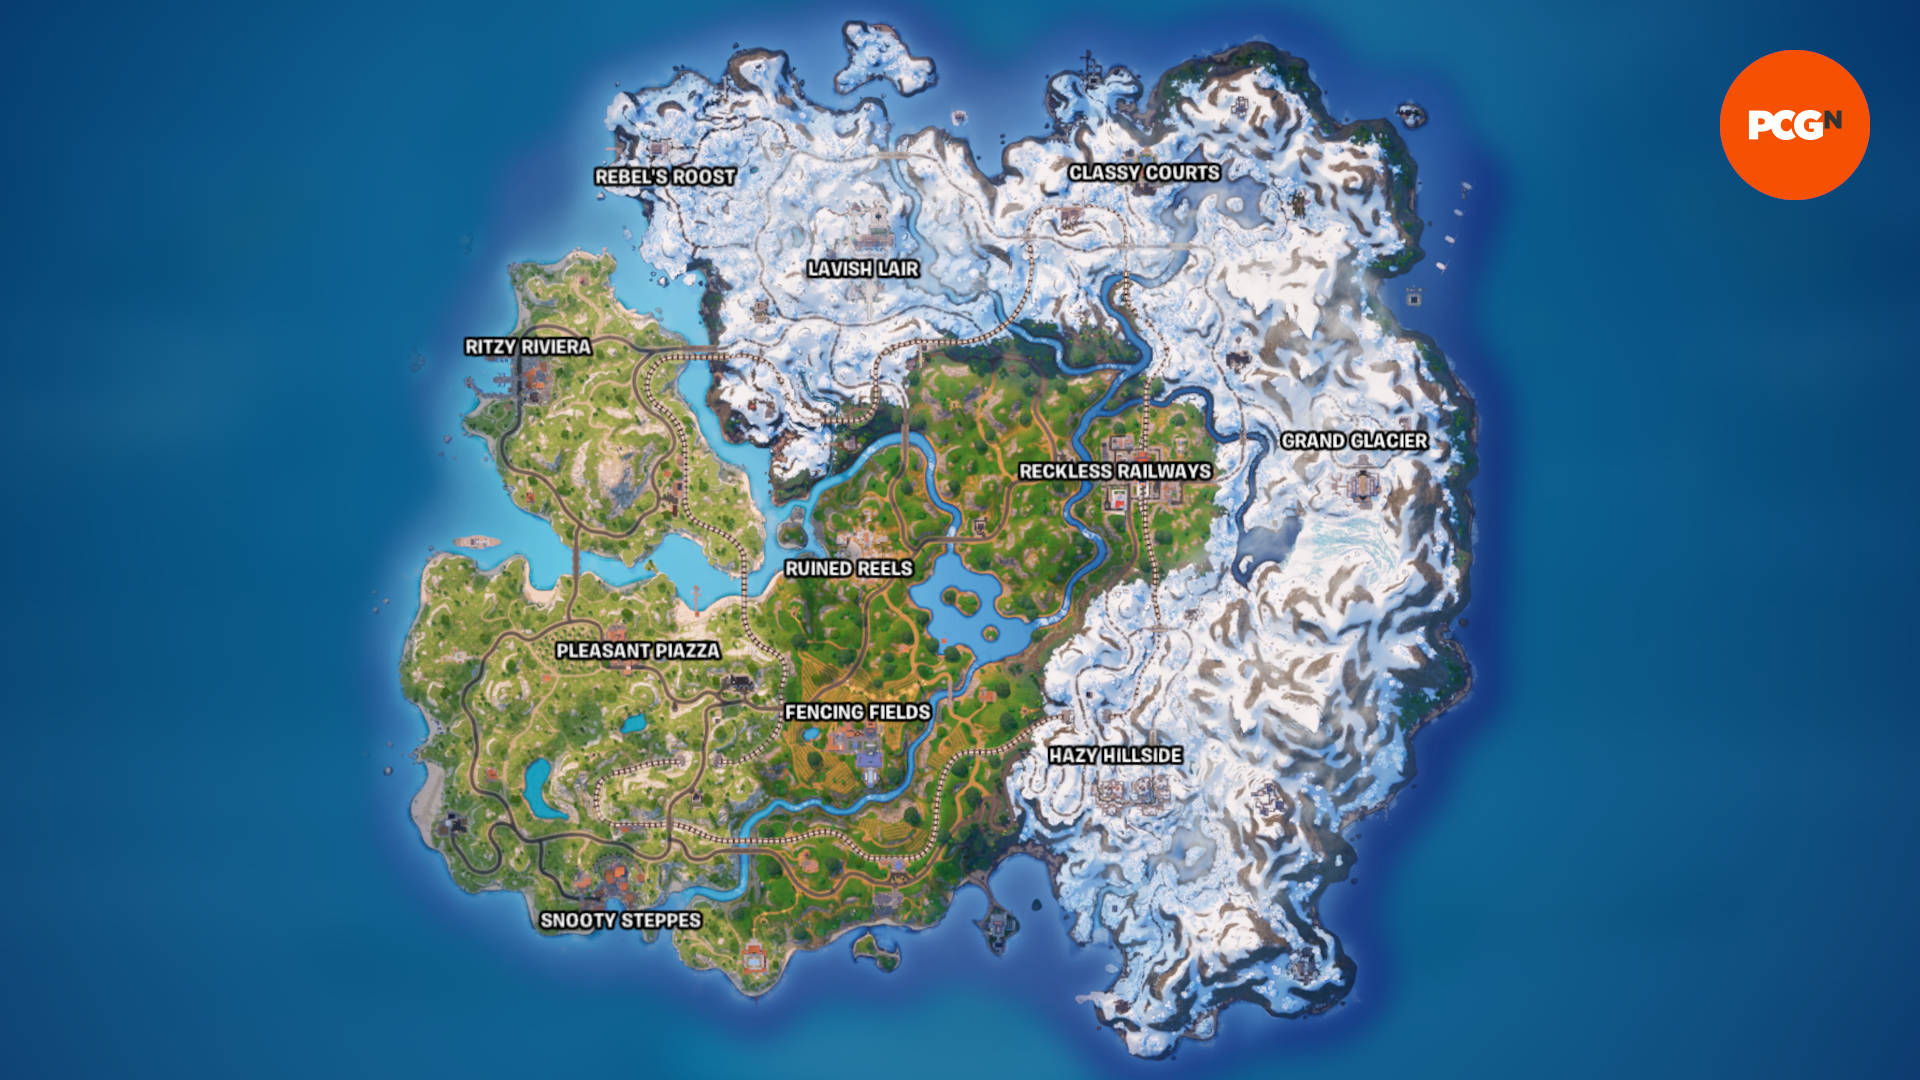 Fortnite Llama locations: Where to increase your chances of